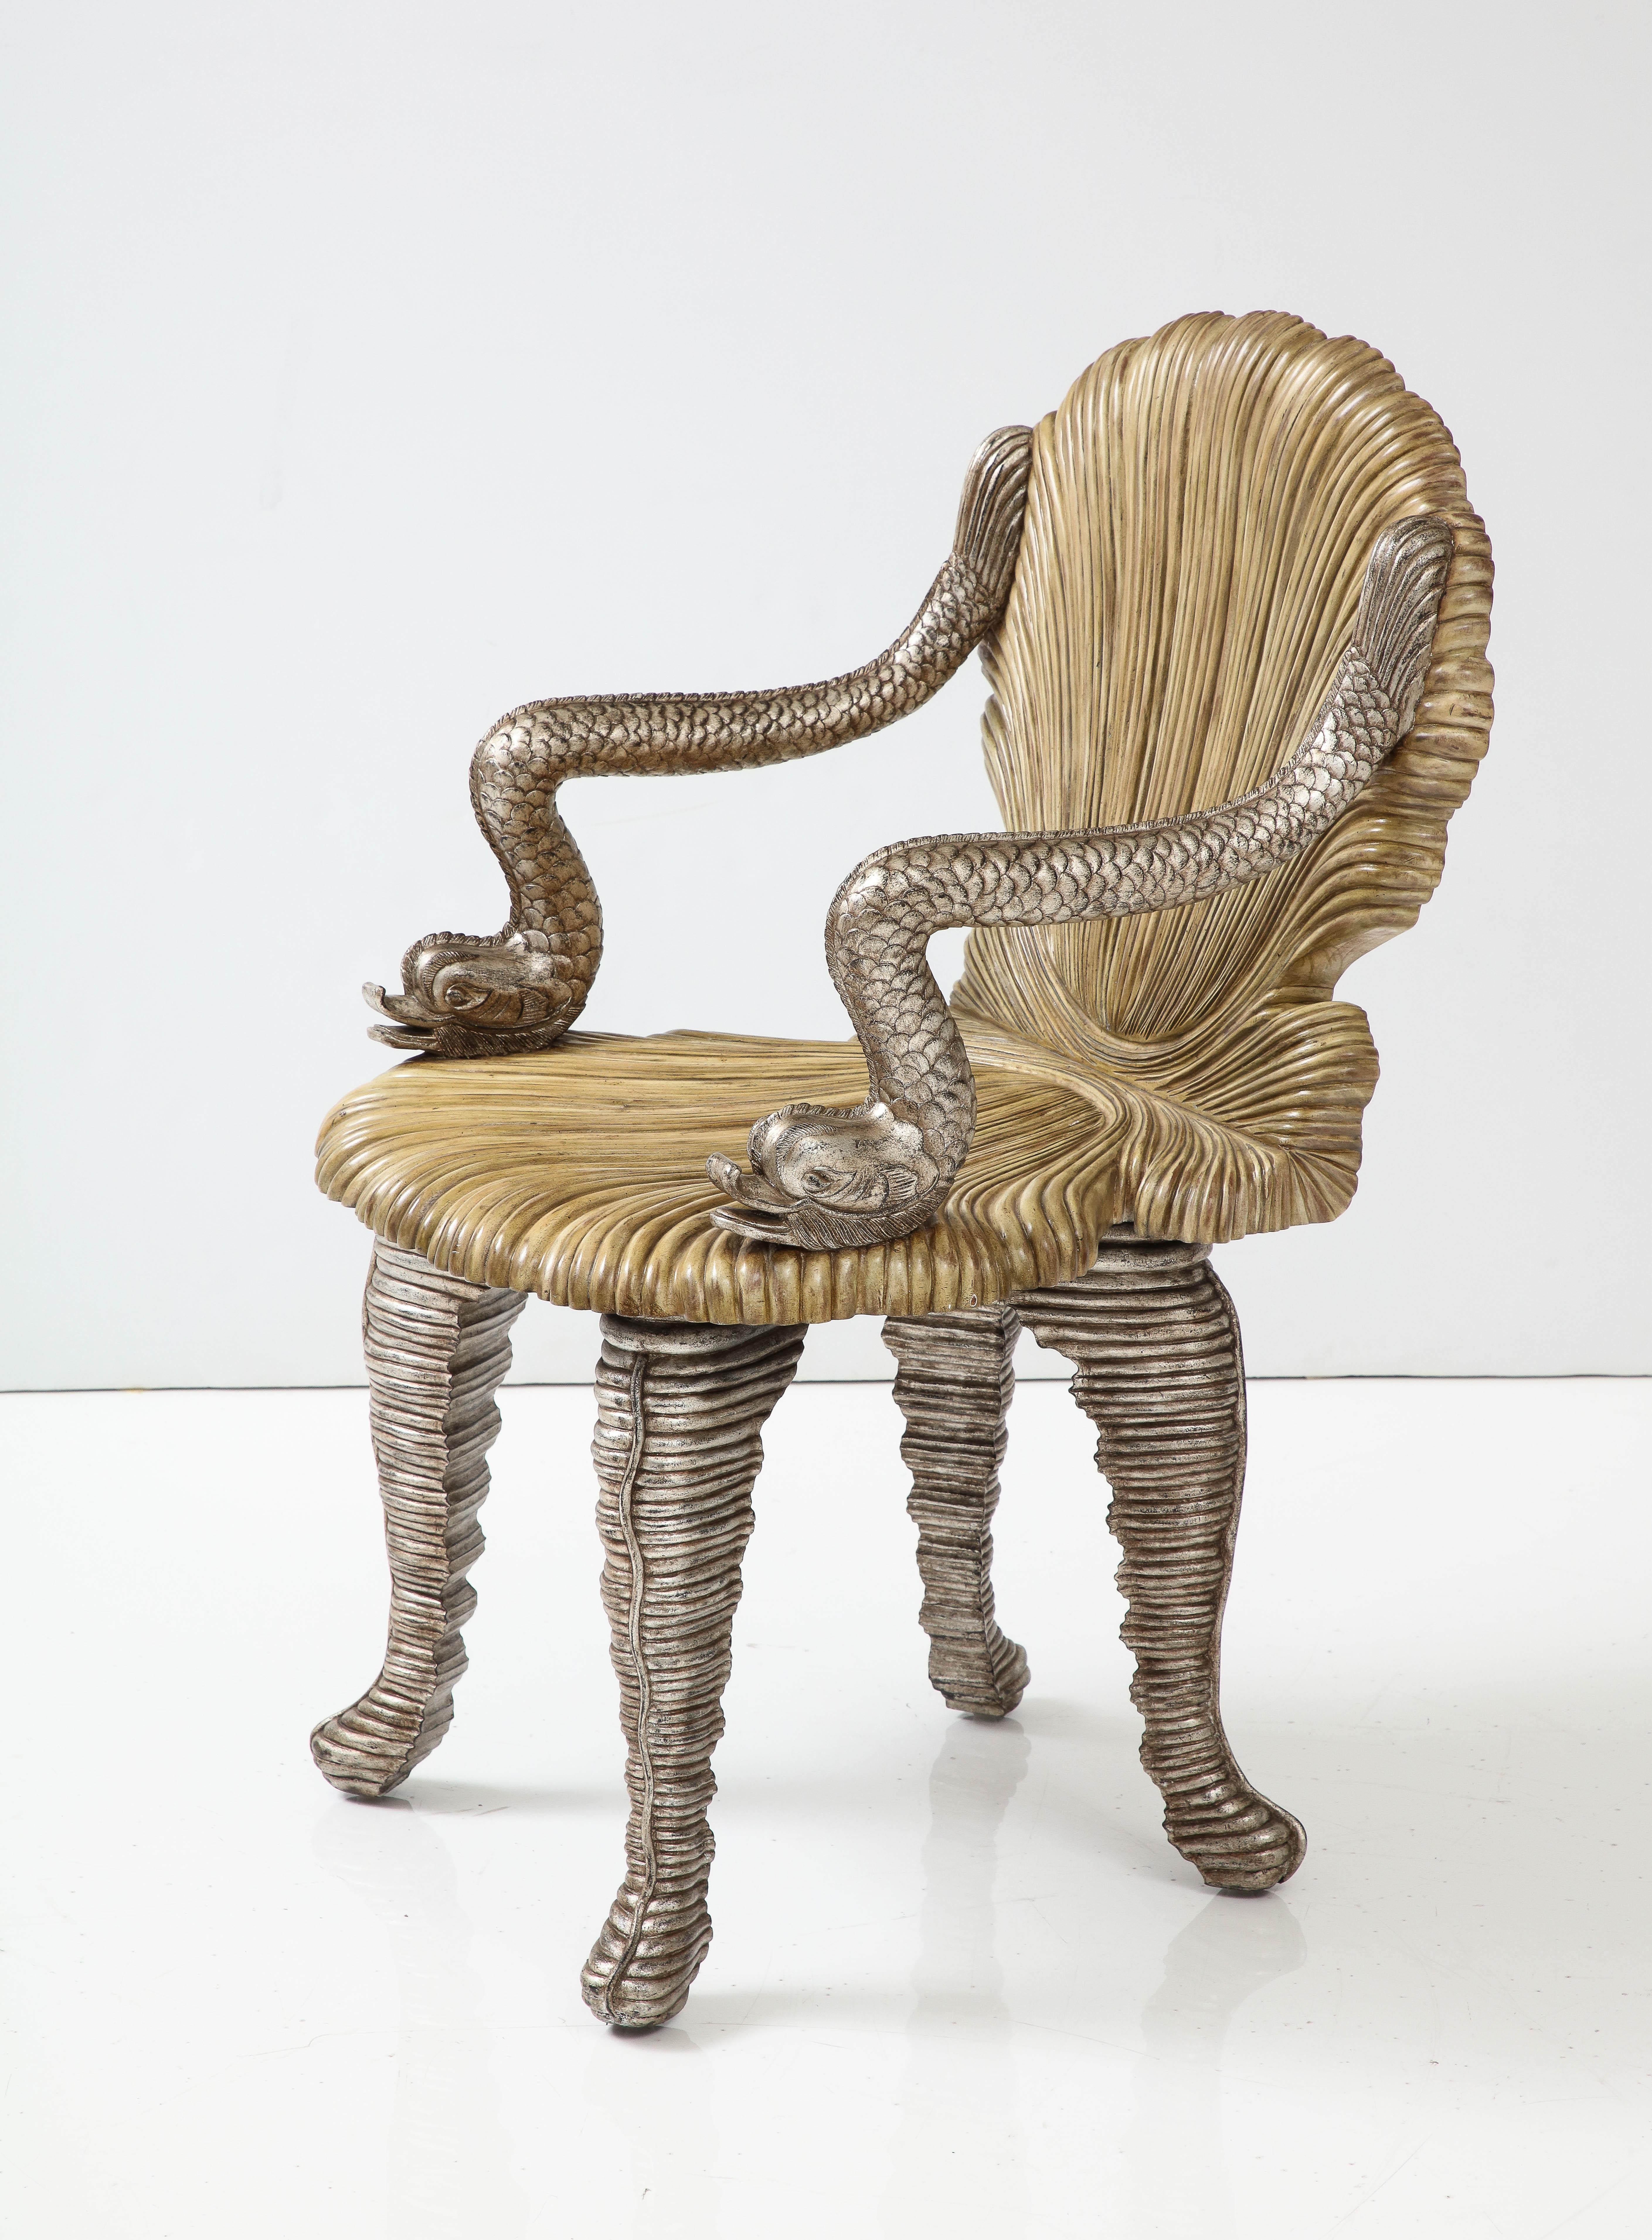 Wonderful carved grotto chair by Maitland Smith.
A Pair of silver leafed dolphins sit either side of the carved seat and chair back
and are supported by silver leafed rouged legs.